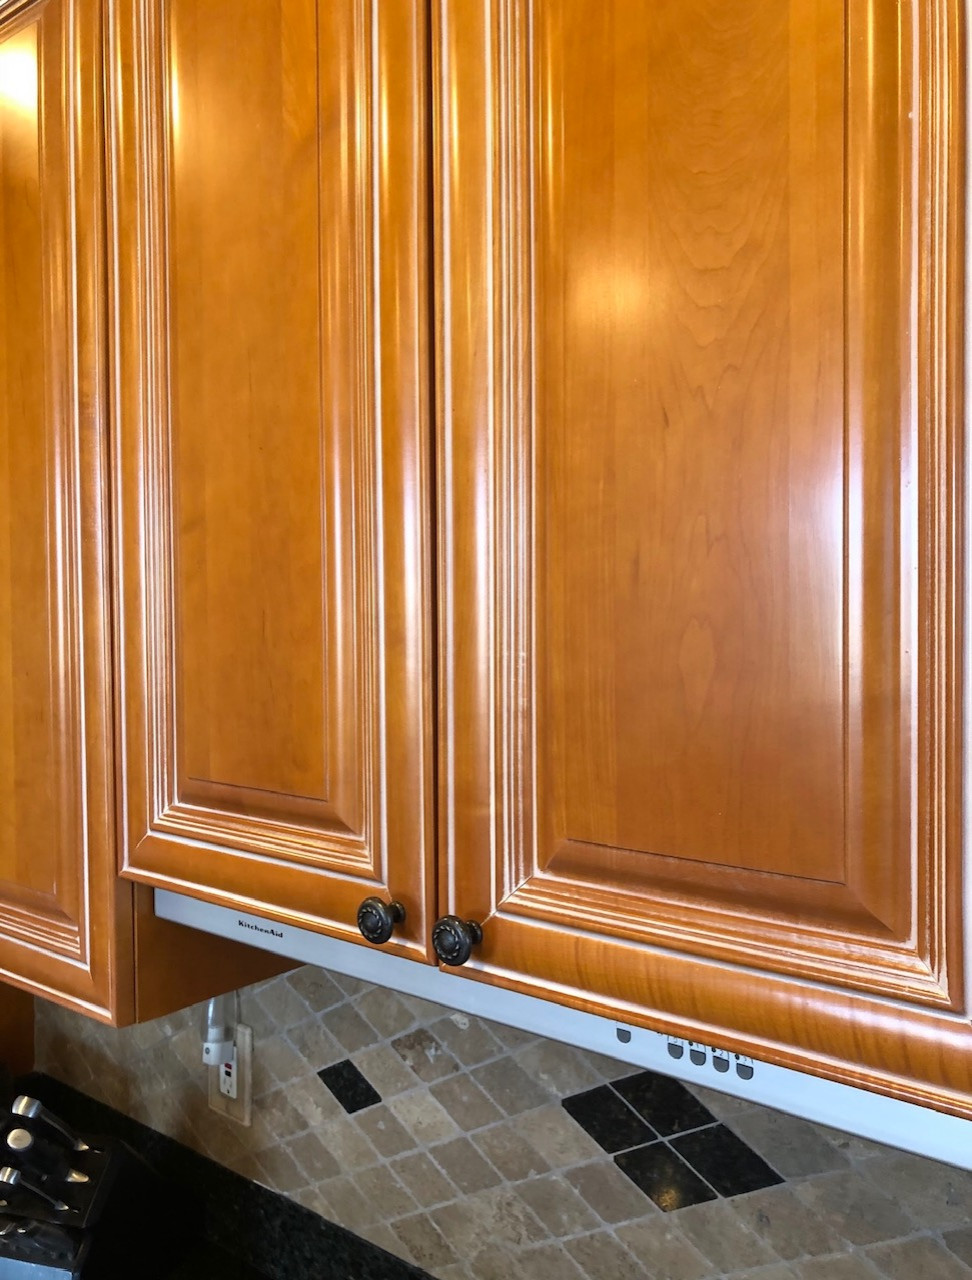 Kitchen and Bathroom Reface with Pantry Build